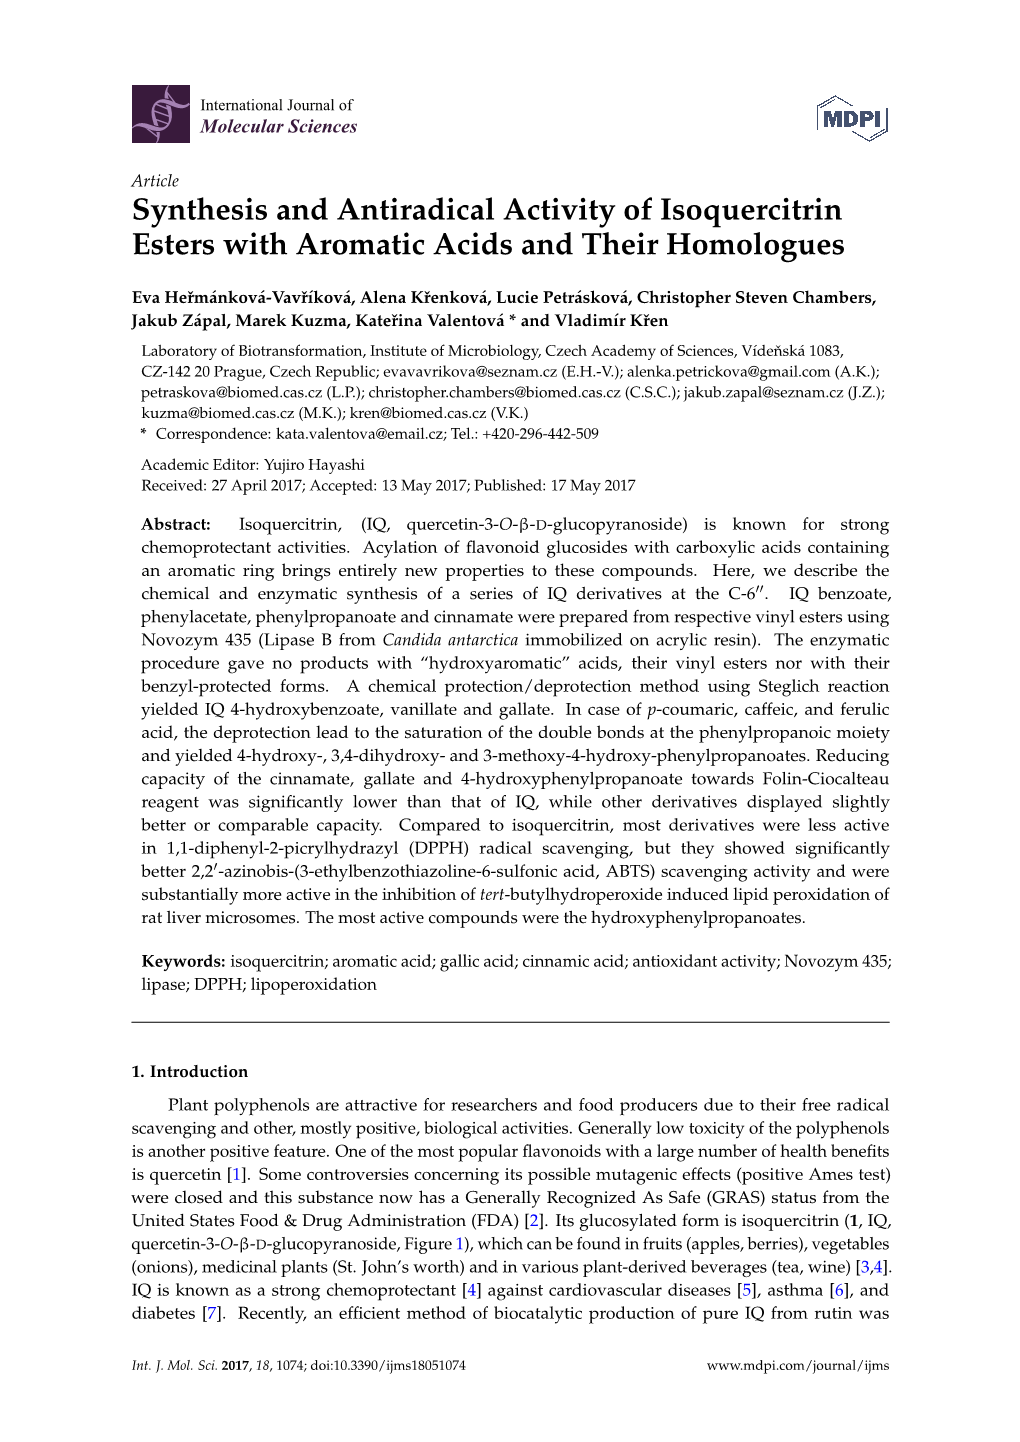 Synthesis and Antiradical Activity of Isoquercitrin Esters with Aromatic Acids and Their Homologues